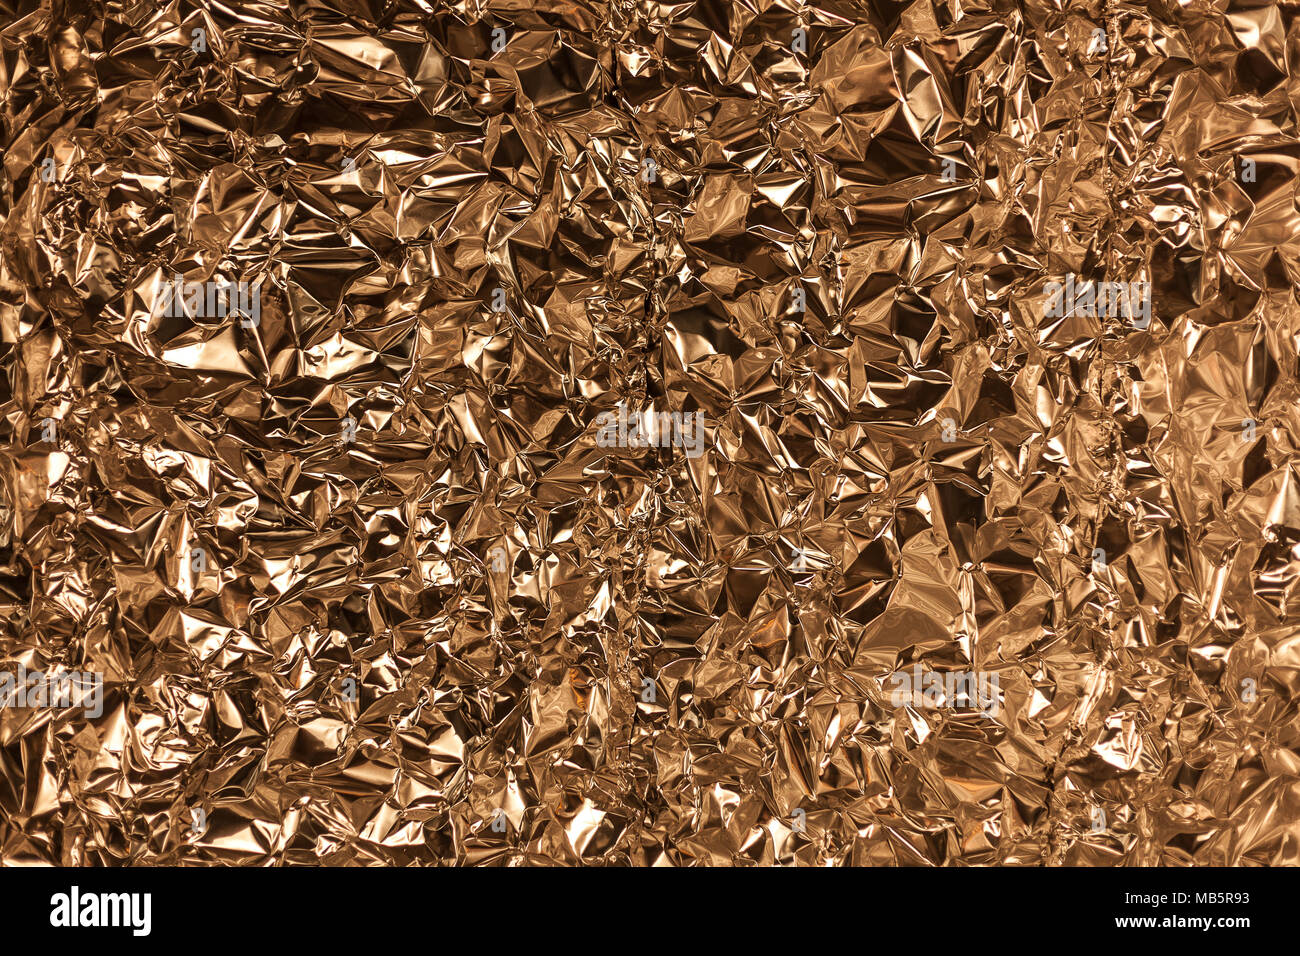 Crumpled Aluminum Foil Background Texture - in Gold Color Stock